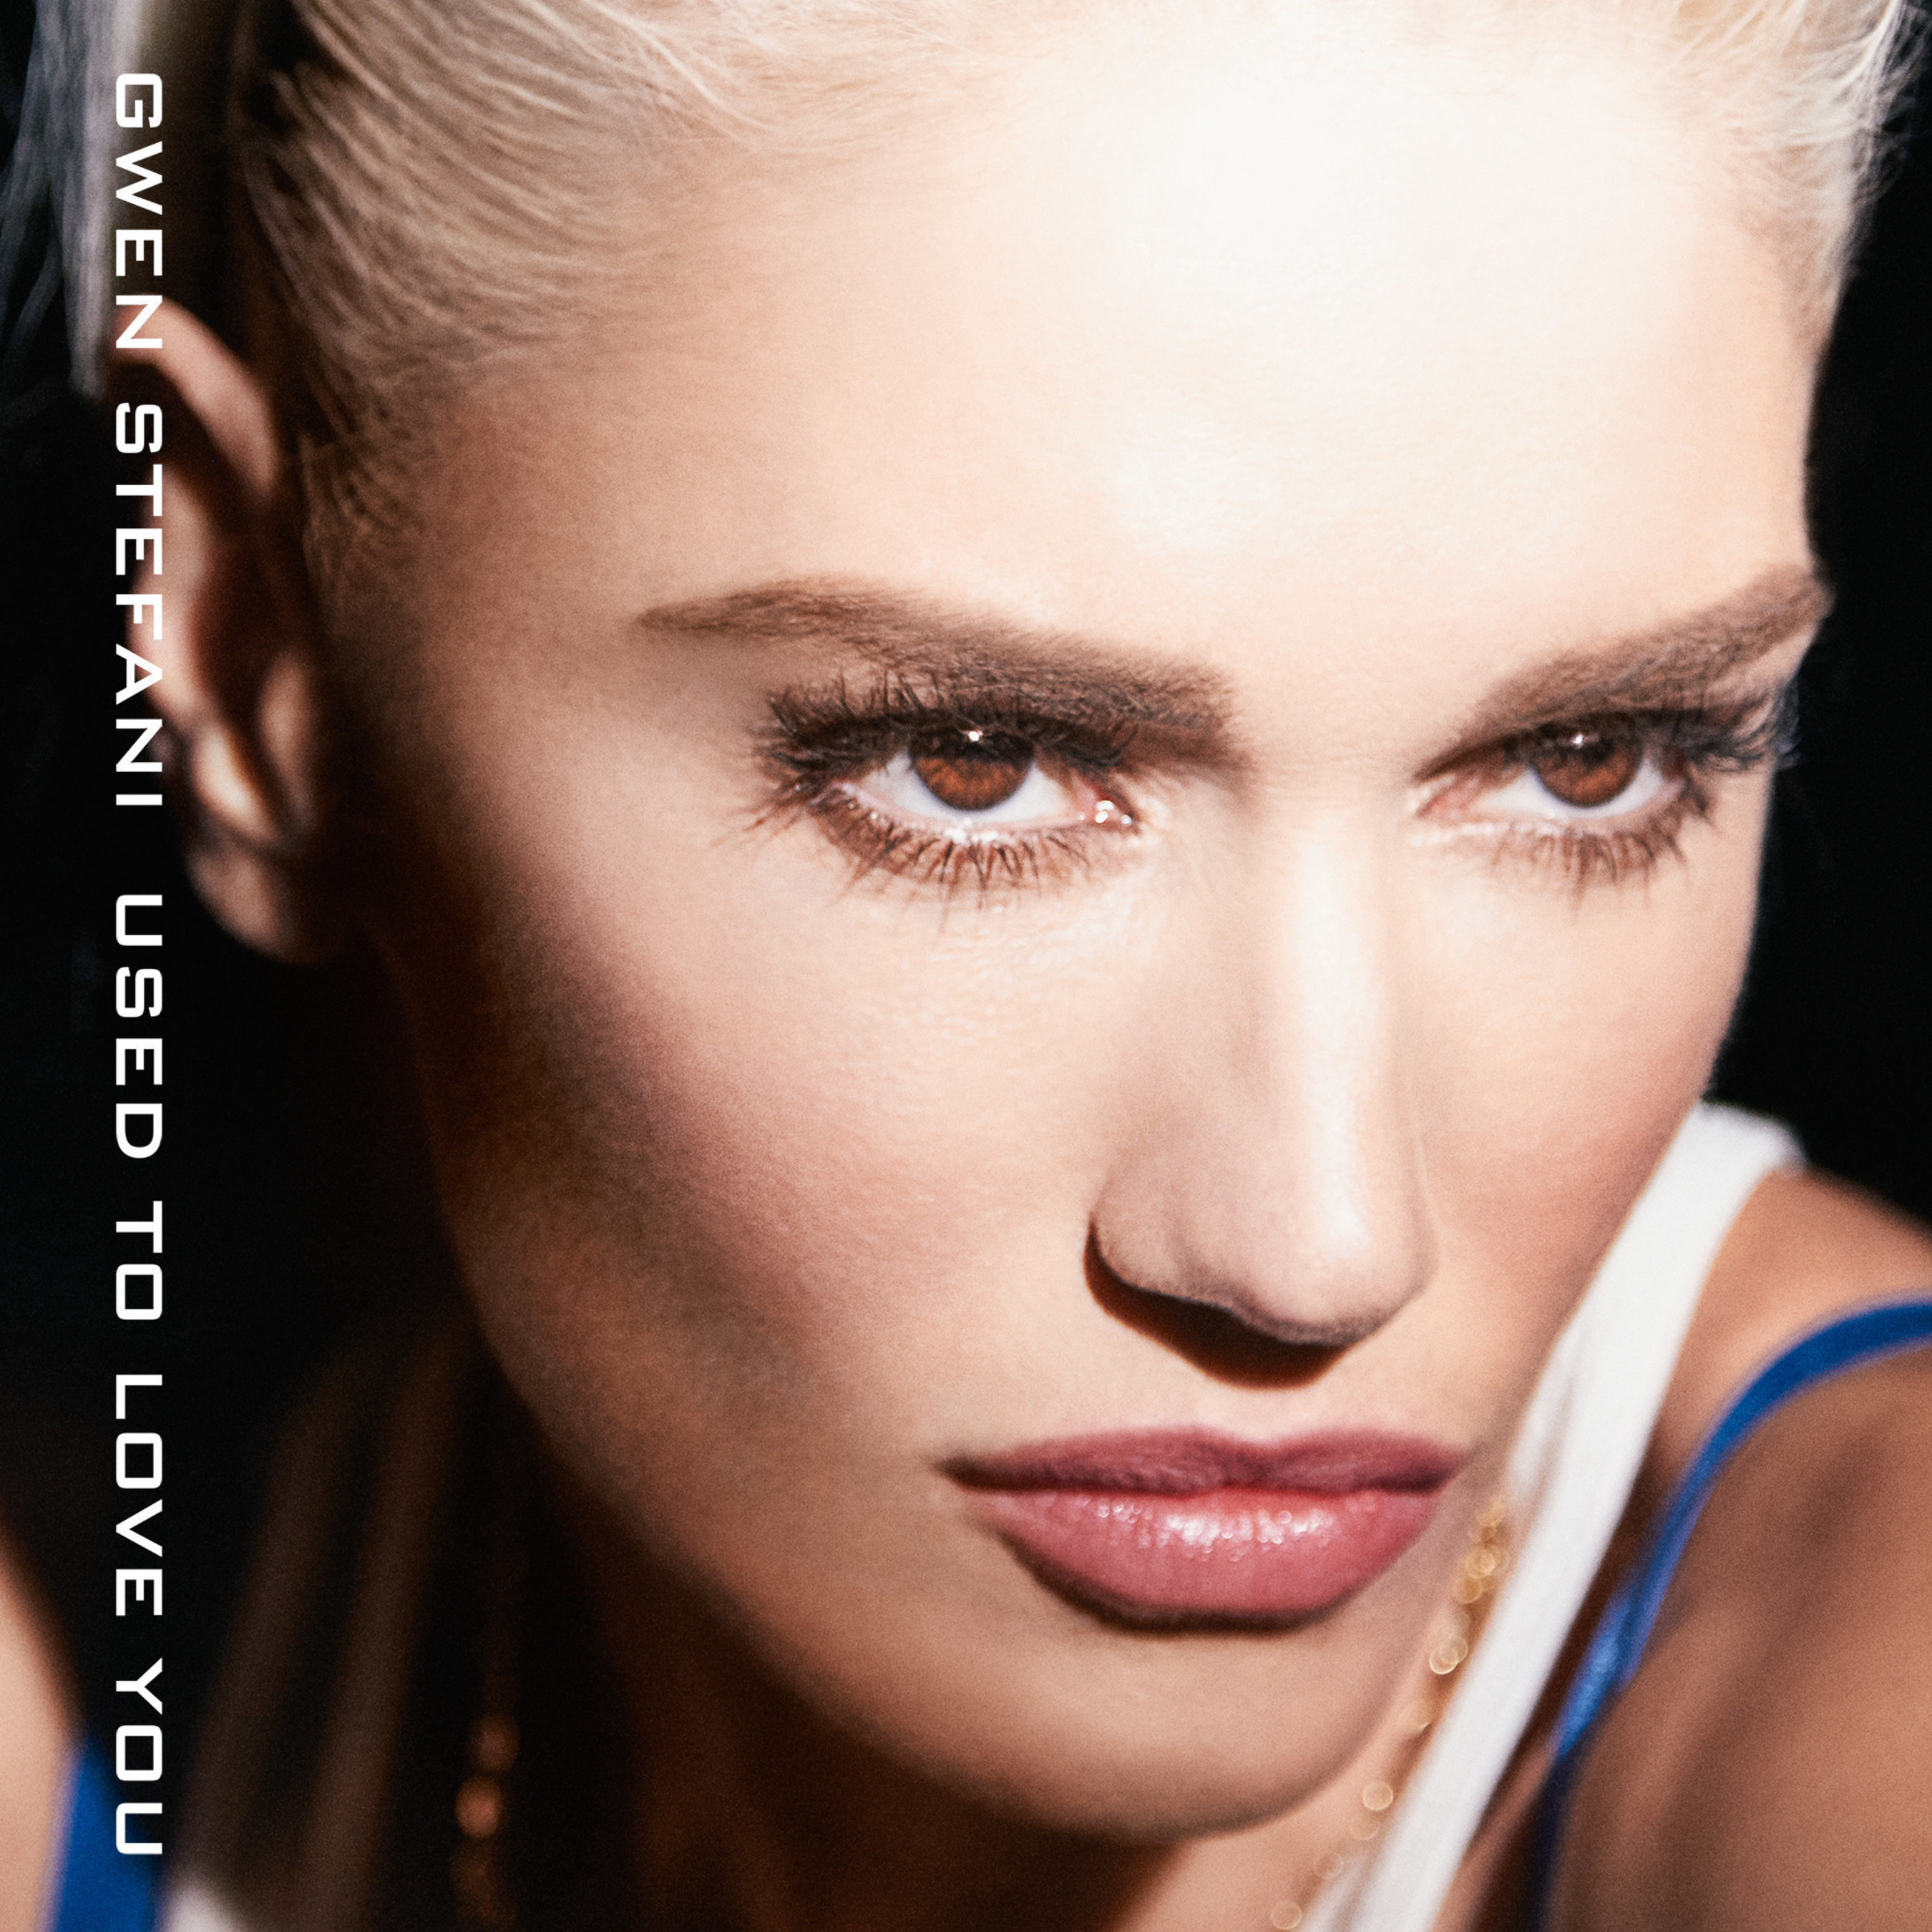 Gwen Stefani Releases New Single "Used To Love You" Today